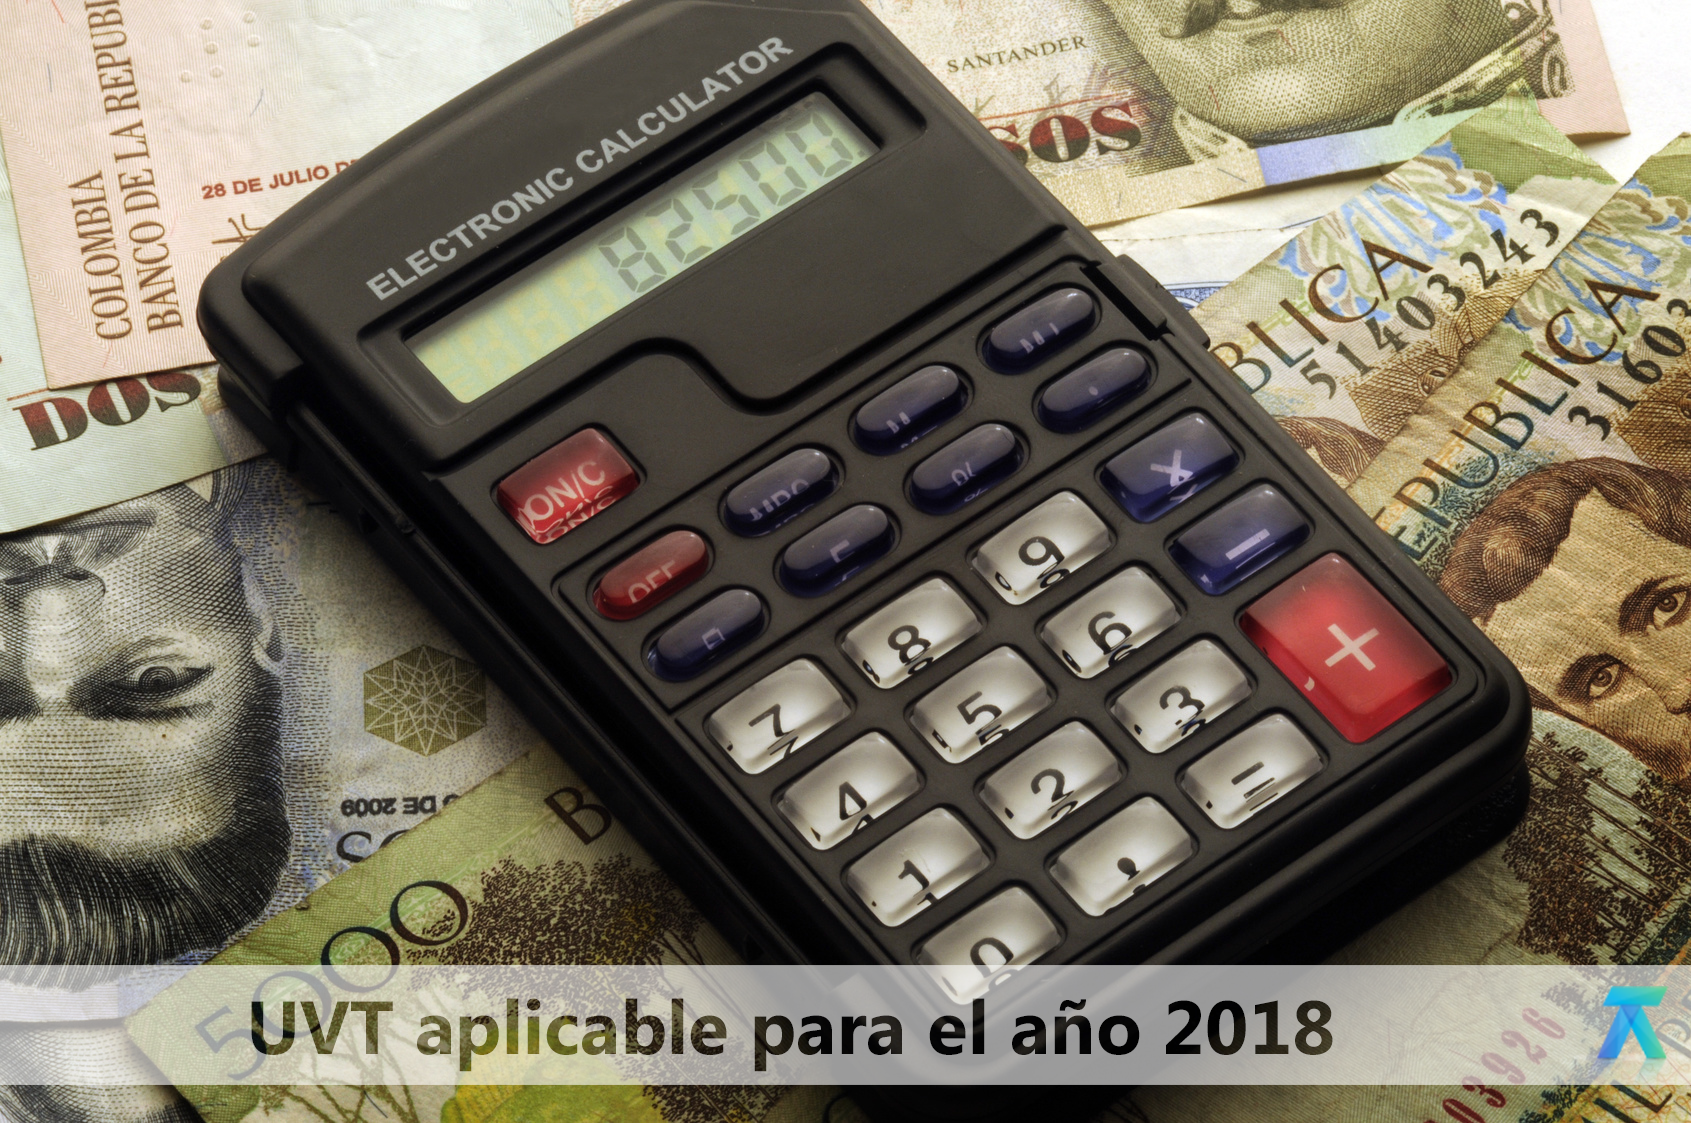 DIAN fixed value of the UVT for the year 2018